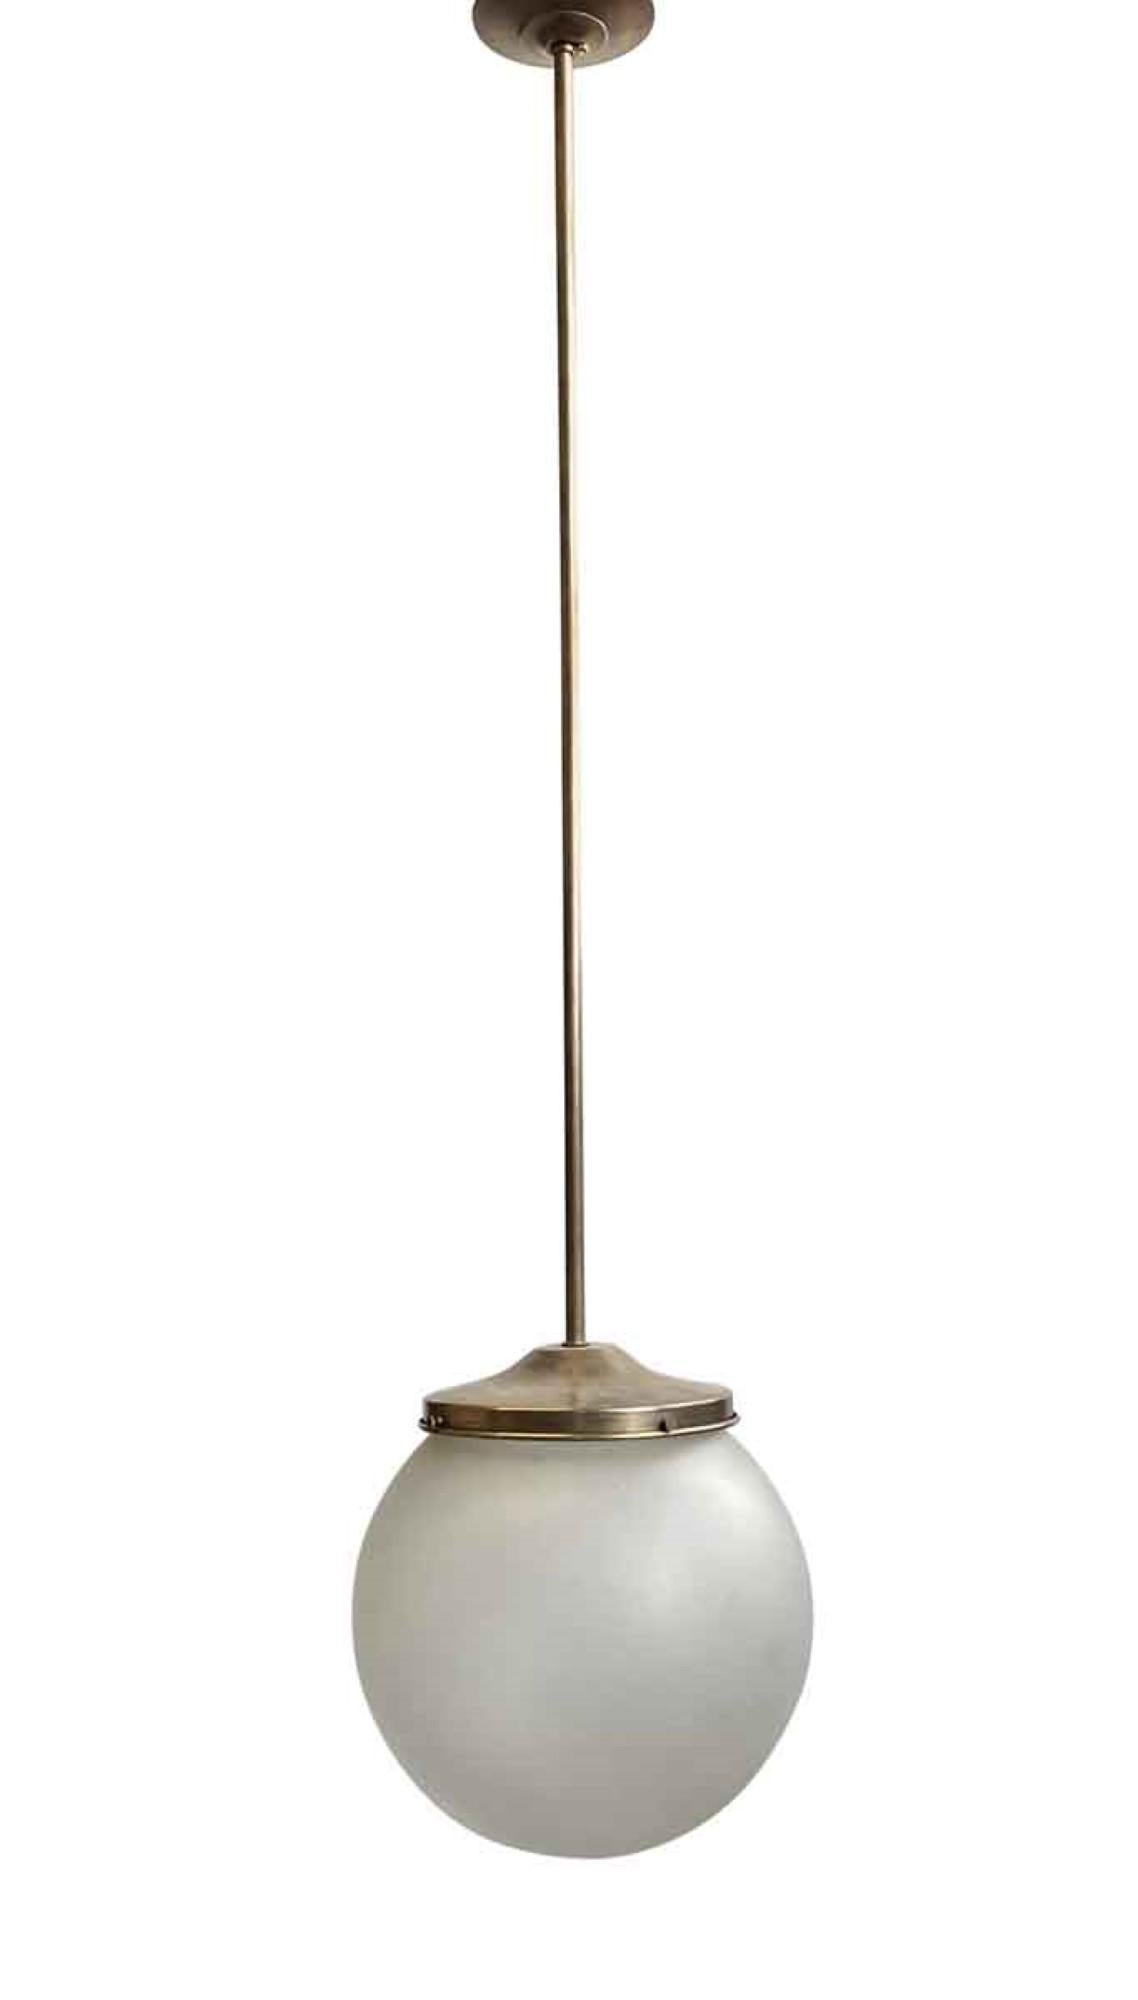 1940s frosted glass globe, new antique brass finished hardware. Can also be made with nickel finish hardware. Cleaned and rewired. Small quantity available at time of posting. Priced each. Please inquire. Please note, this item is located in our